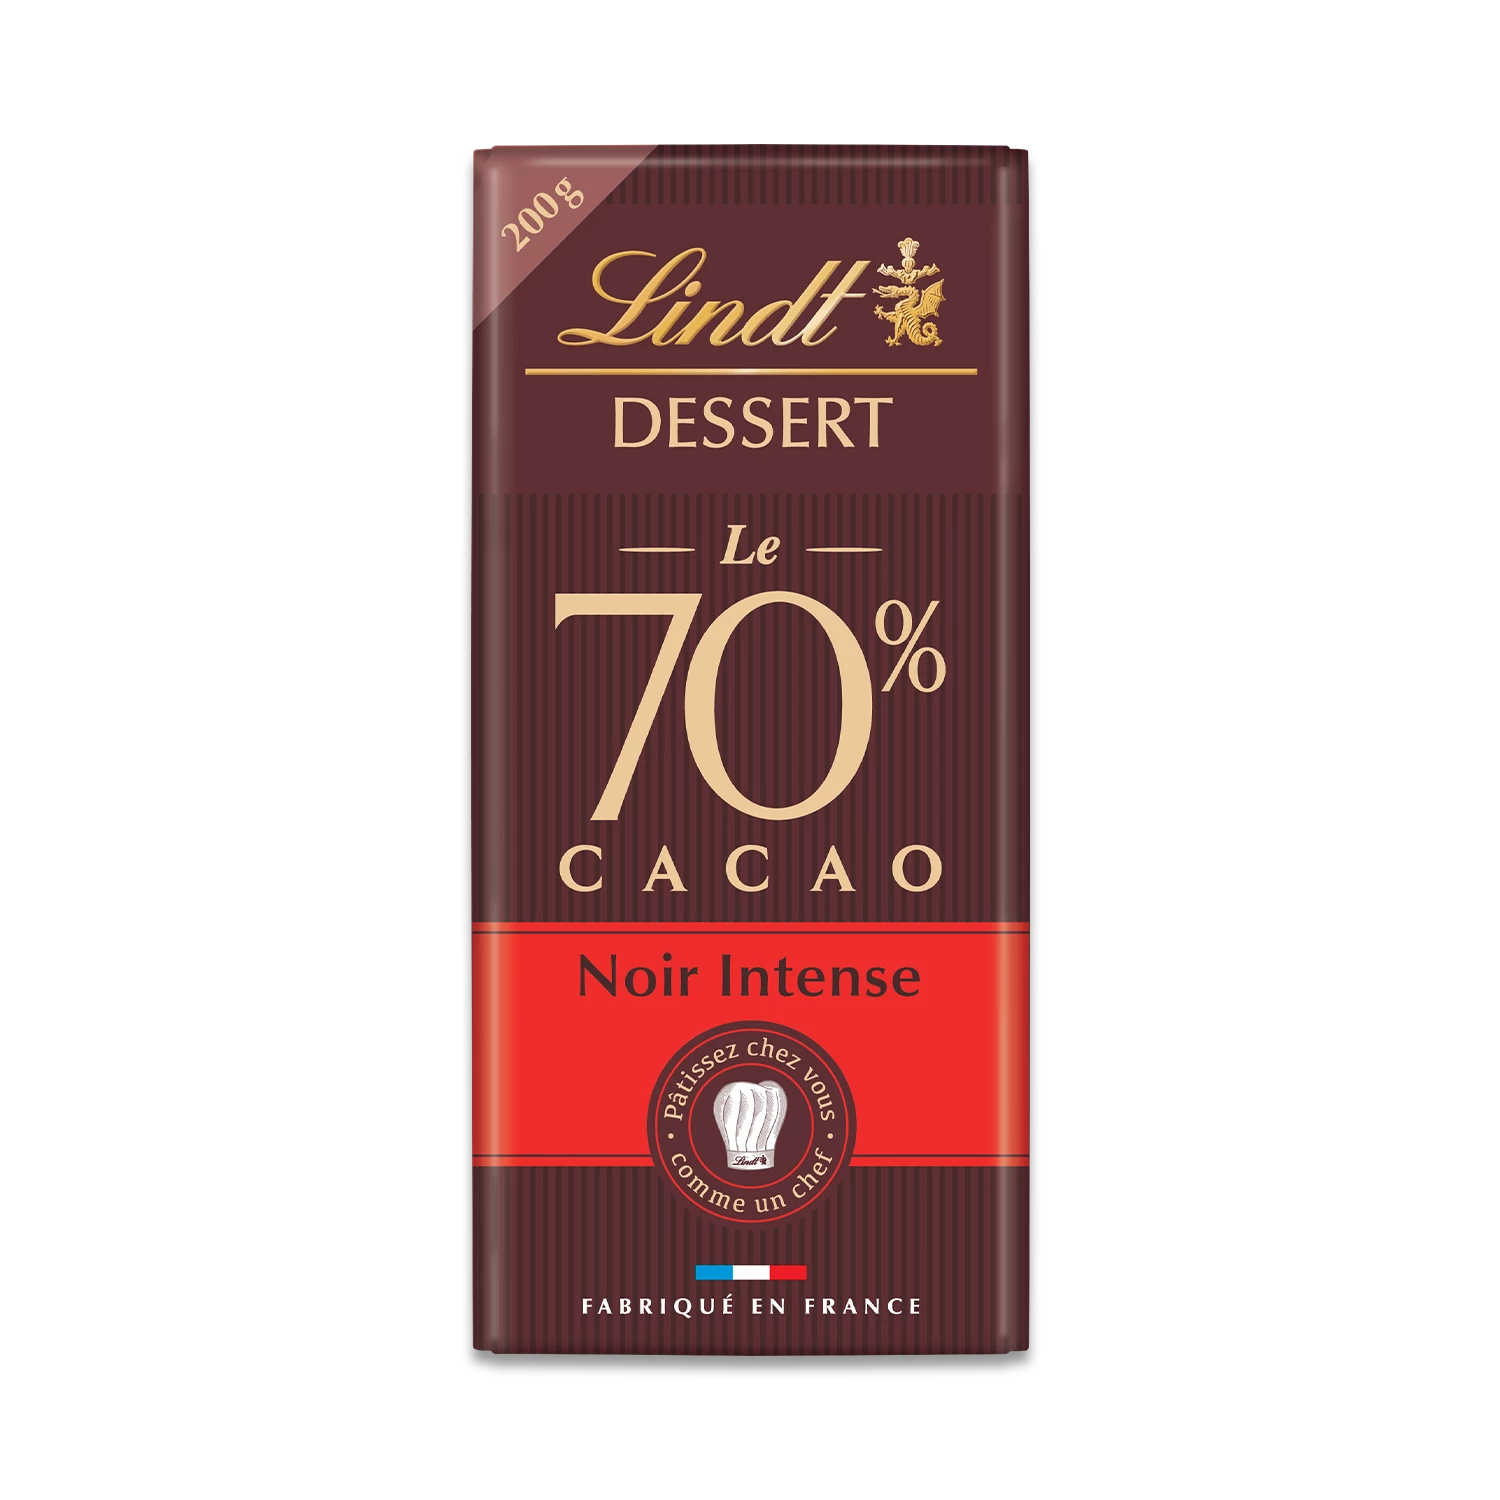 Postre Oscuro 70% Cacao Intenso Tableta 200 G - LINDT